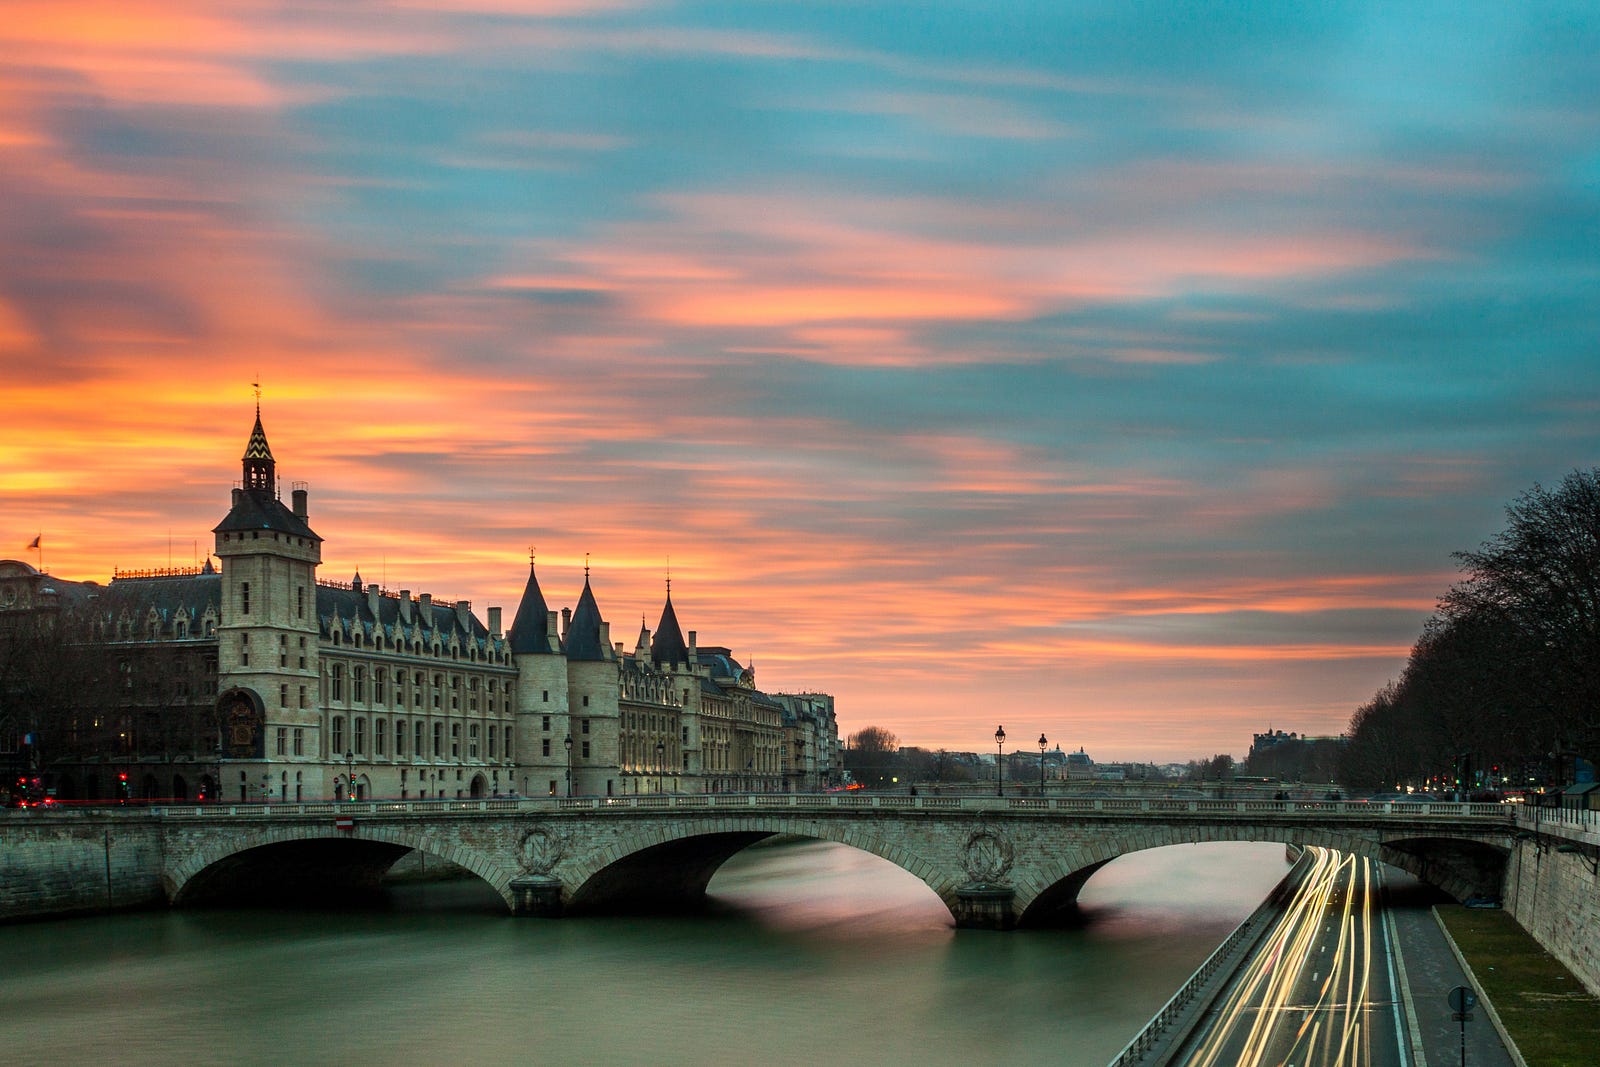 Sunset on a parisian river, with a traditional bridge in the mid-ground. The famous “French Paradox” highlights the seemingly contradictory relationship between the French diet, rich in wine, and a relatively low incidence of cardiovascular diseases. Photo by Bruno Abatti on Unsplash